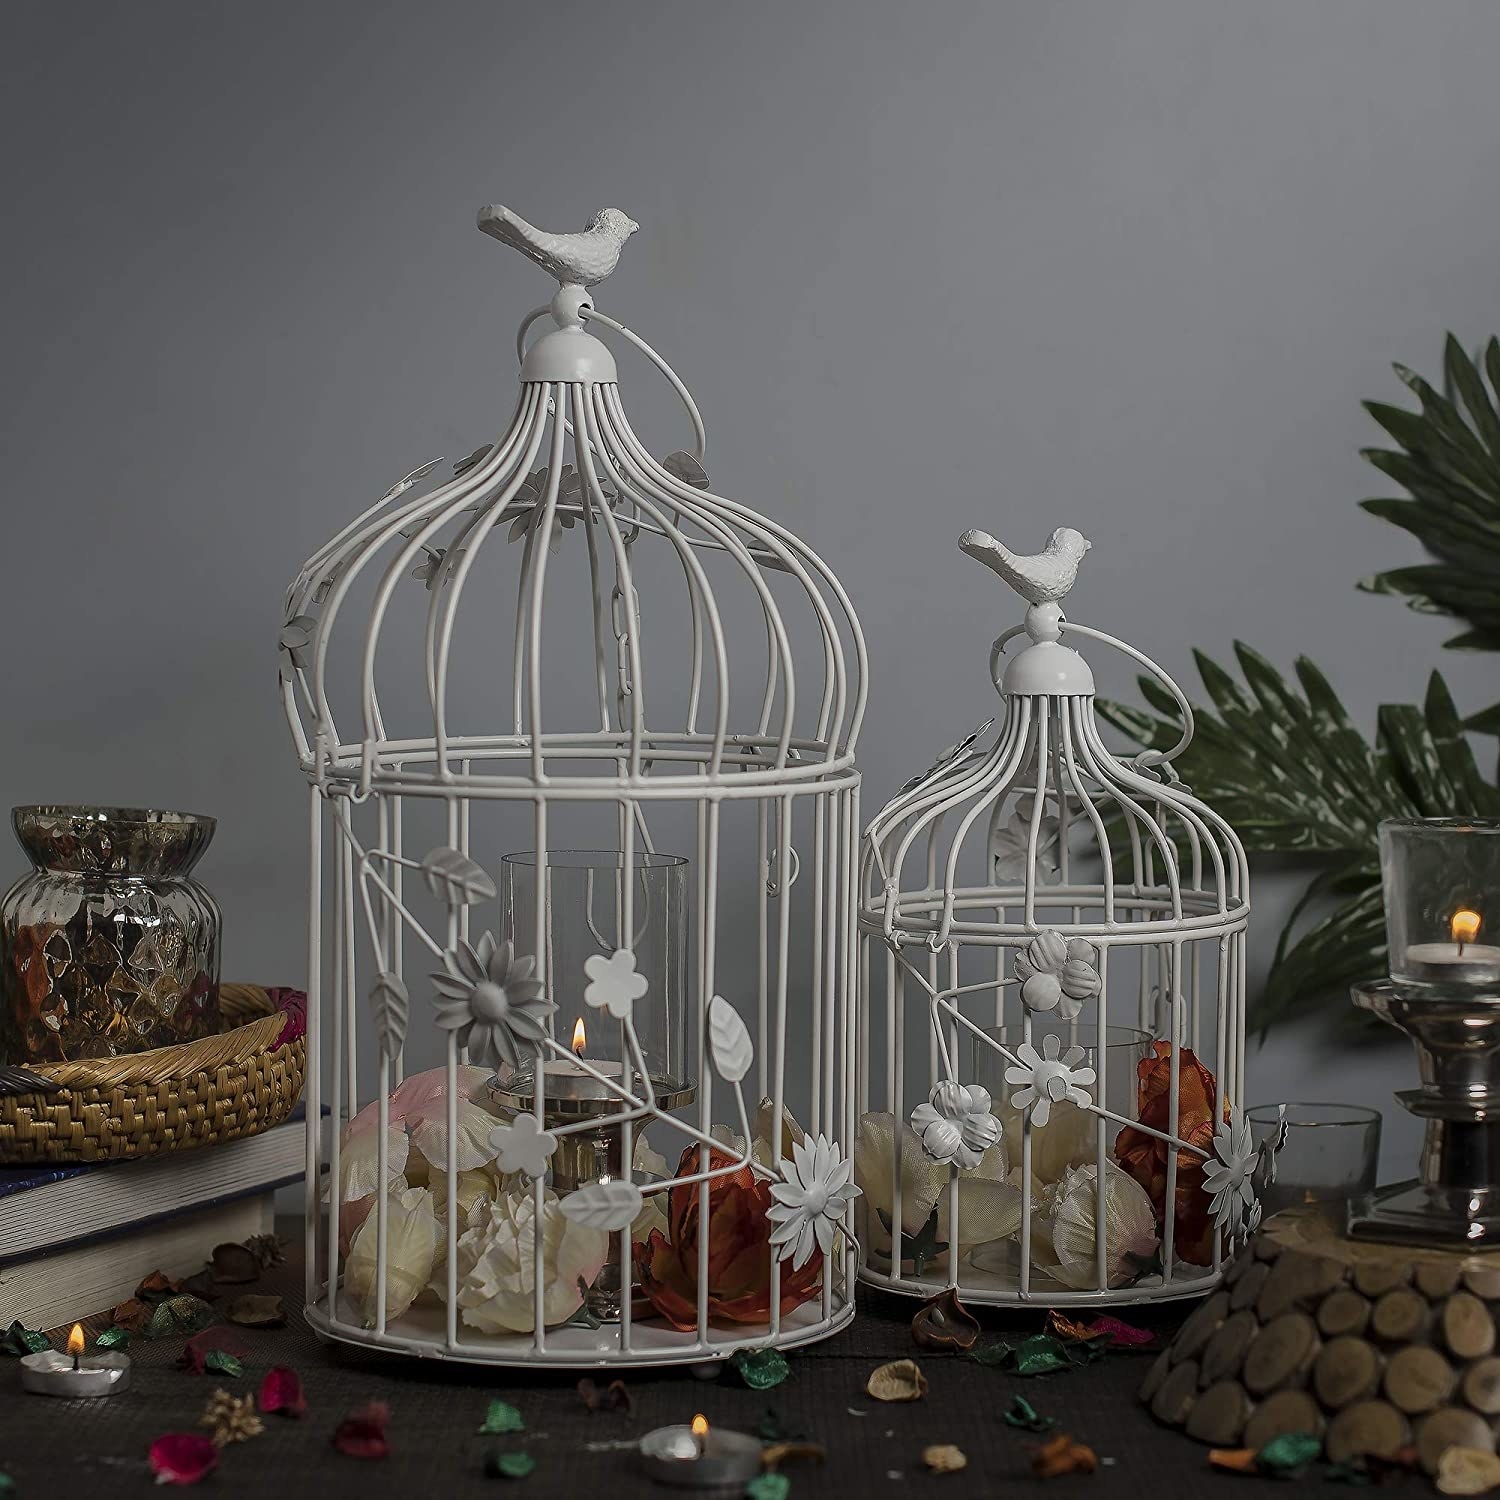 Birdcages with candles and flowers inside.